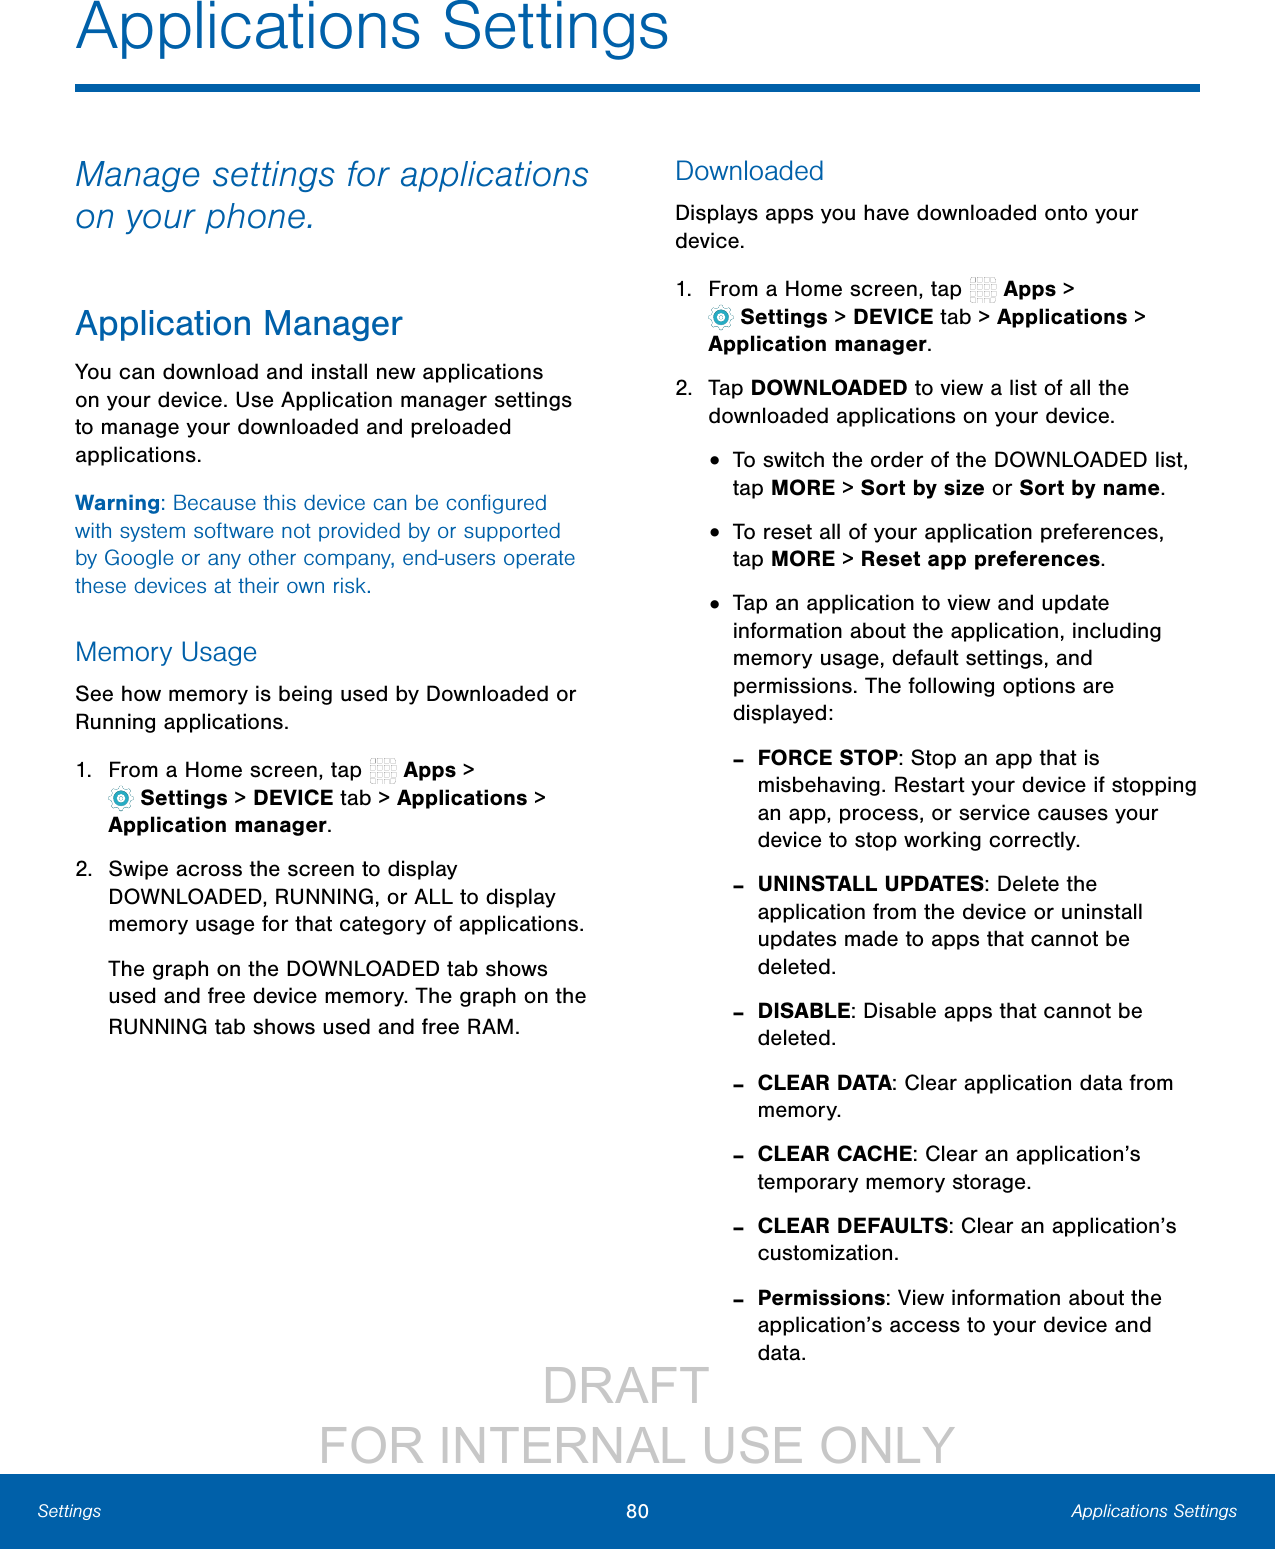                 DRAFT FOR INTERNAL USE ONLY80 Applications SettingsSettingsApplications SettingsManage settings for applications on your phone.Application ManagerYou can download and install new applications on your device. Use Application manager settings to manage your downloaded and preloaded applications.Warning: Because this device can be conﬁgured with system software not provided by or supported by Google or any other company, end-users operate these devices at their own risk.Memory UsageSee how memory is being used by Downloaded or Running applications.1.  From a Home screen, tap   Apps&gt; Settings &gt; DEVICE tab &gt; Applications &gt; Applicationmanager.2.  Swipe across the screen to display DOWNLOADED, RUNNING, or ALL to display memory usage for that category of applications.The graph on the DOWNLOADED tab shows used and free device memory. The graph on the RUNNING tab shows used and free RAM.DownloadedDisplays apps you have downloaded onto your device.1.  From a Home screen, tap   Apps&gt; Settings &gt; DEVICE tab &gt; Applications &gt; Applicationmanager.2.  Tap DOWNLOADED to view a list of all the downloaded applications on your device.•  To switch the order of the DOWNLOADED list, tap MORE &gt; Sort by size or Sort by name.•  To reset all of your application preferences, tap MORE &gt; Reset app preferences.•  Tap an application to view and update information about the application, including memory usage, default settings, and permissions. The following options are displayed: -FORCE STOP: Stop an app that is misbehaving. Restart your device if stopping an app, process, or service causes your device to stop working correctly. -UNINSTALL UPDATES: Delete the application from the device or uninstall updates made to apps that cannot be deleted. -DISABLE: Disable apps that cannot be deleted. -CLEAR DATA: Clear application data from memory. -CLEAR CACHE: Clear an application’s temporary memory storage. -CLEAR DEFAULTS: Clear an application’s customization. -Permissions: View information about the application’s access to your device and data.